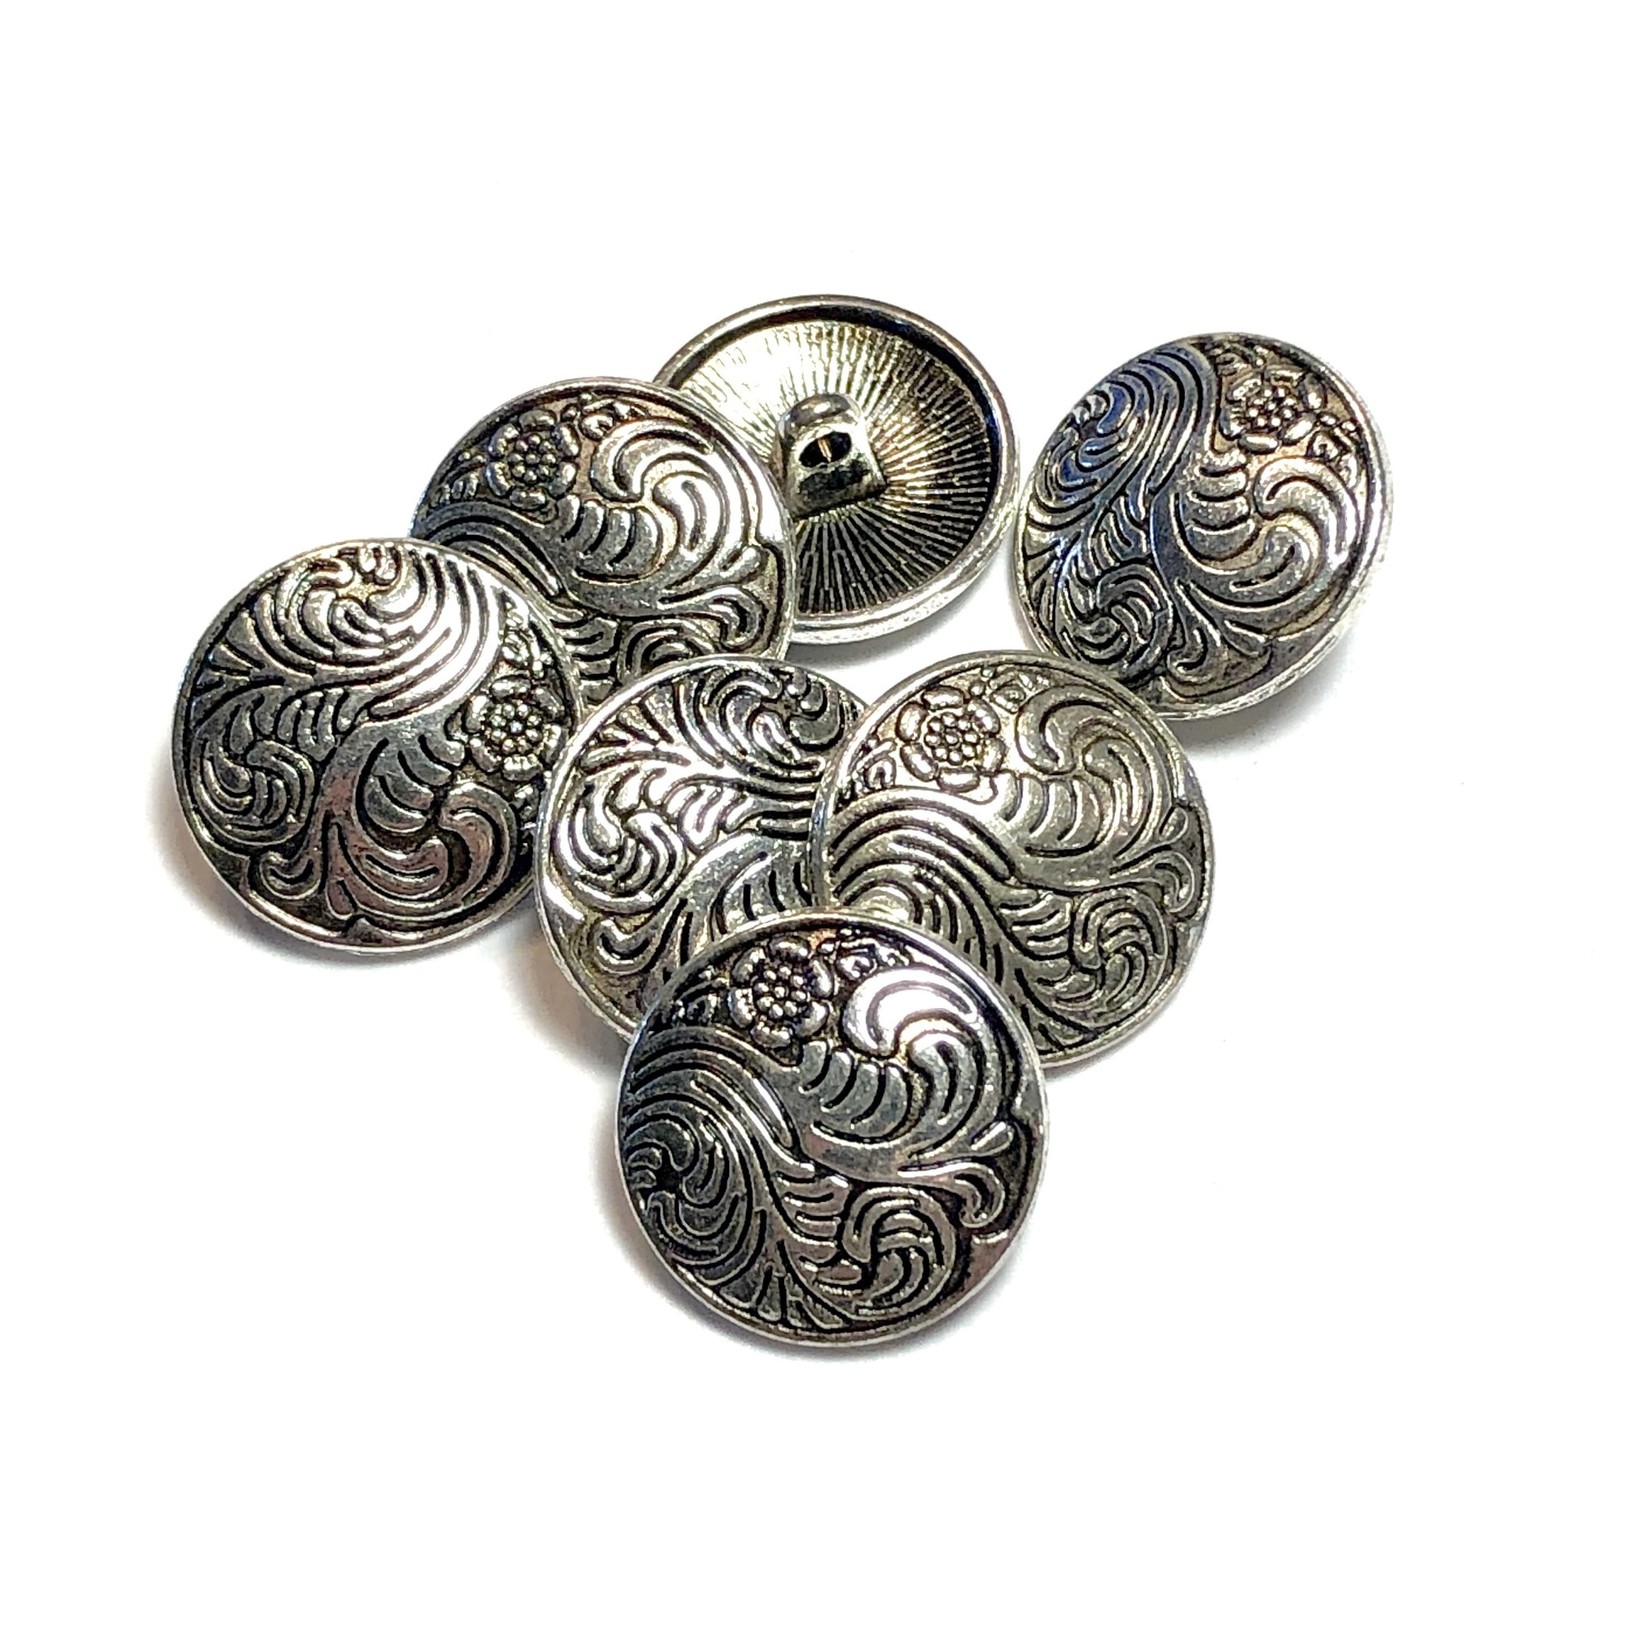 Antique Silver Alloy 17mm Button French Scroll 10pcs